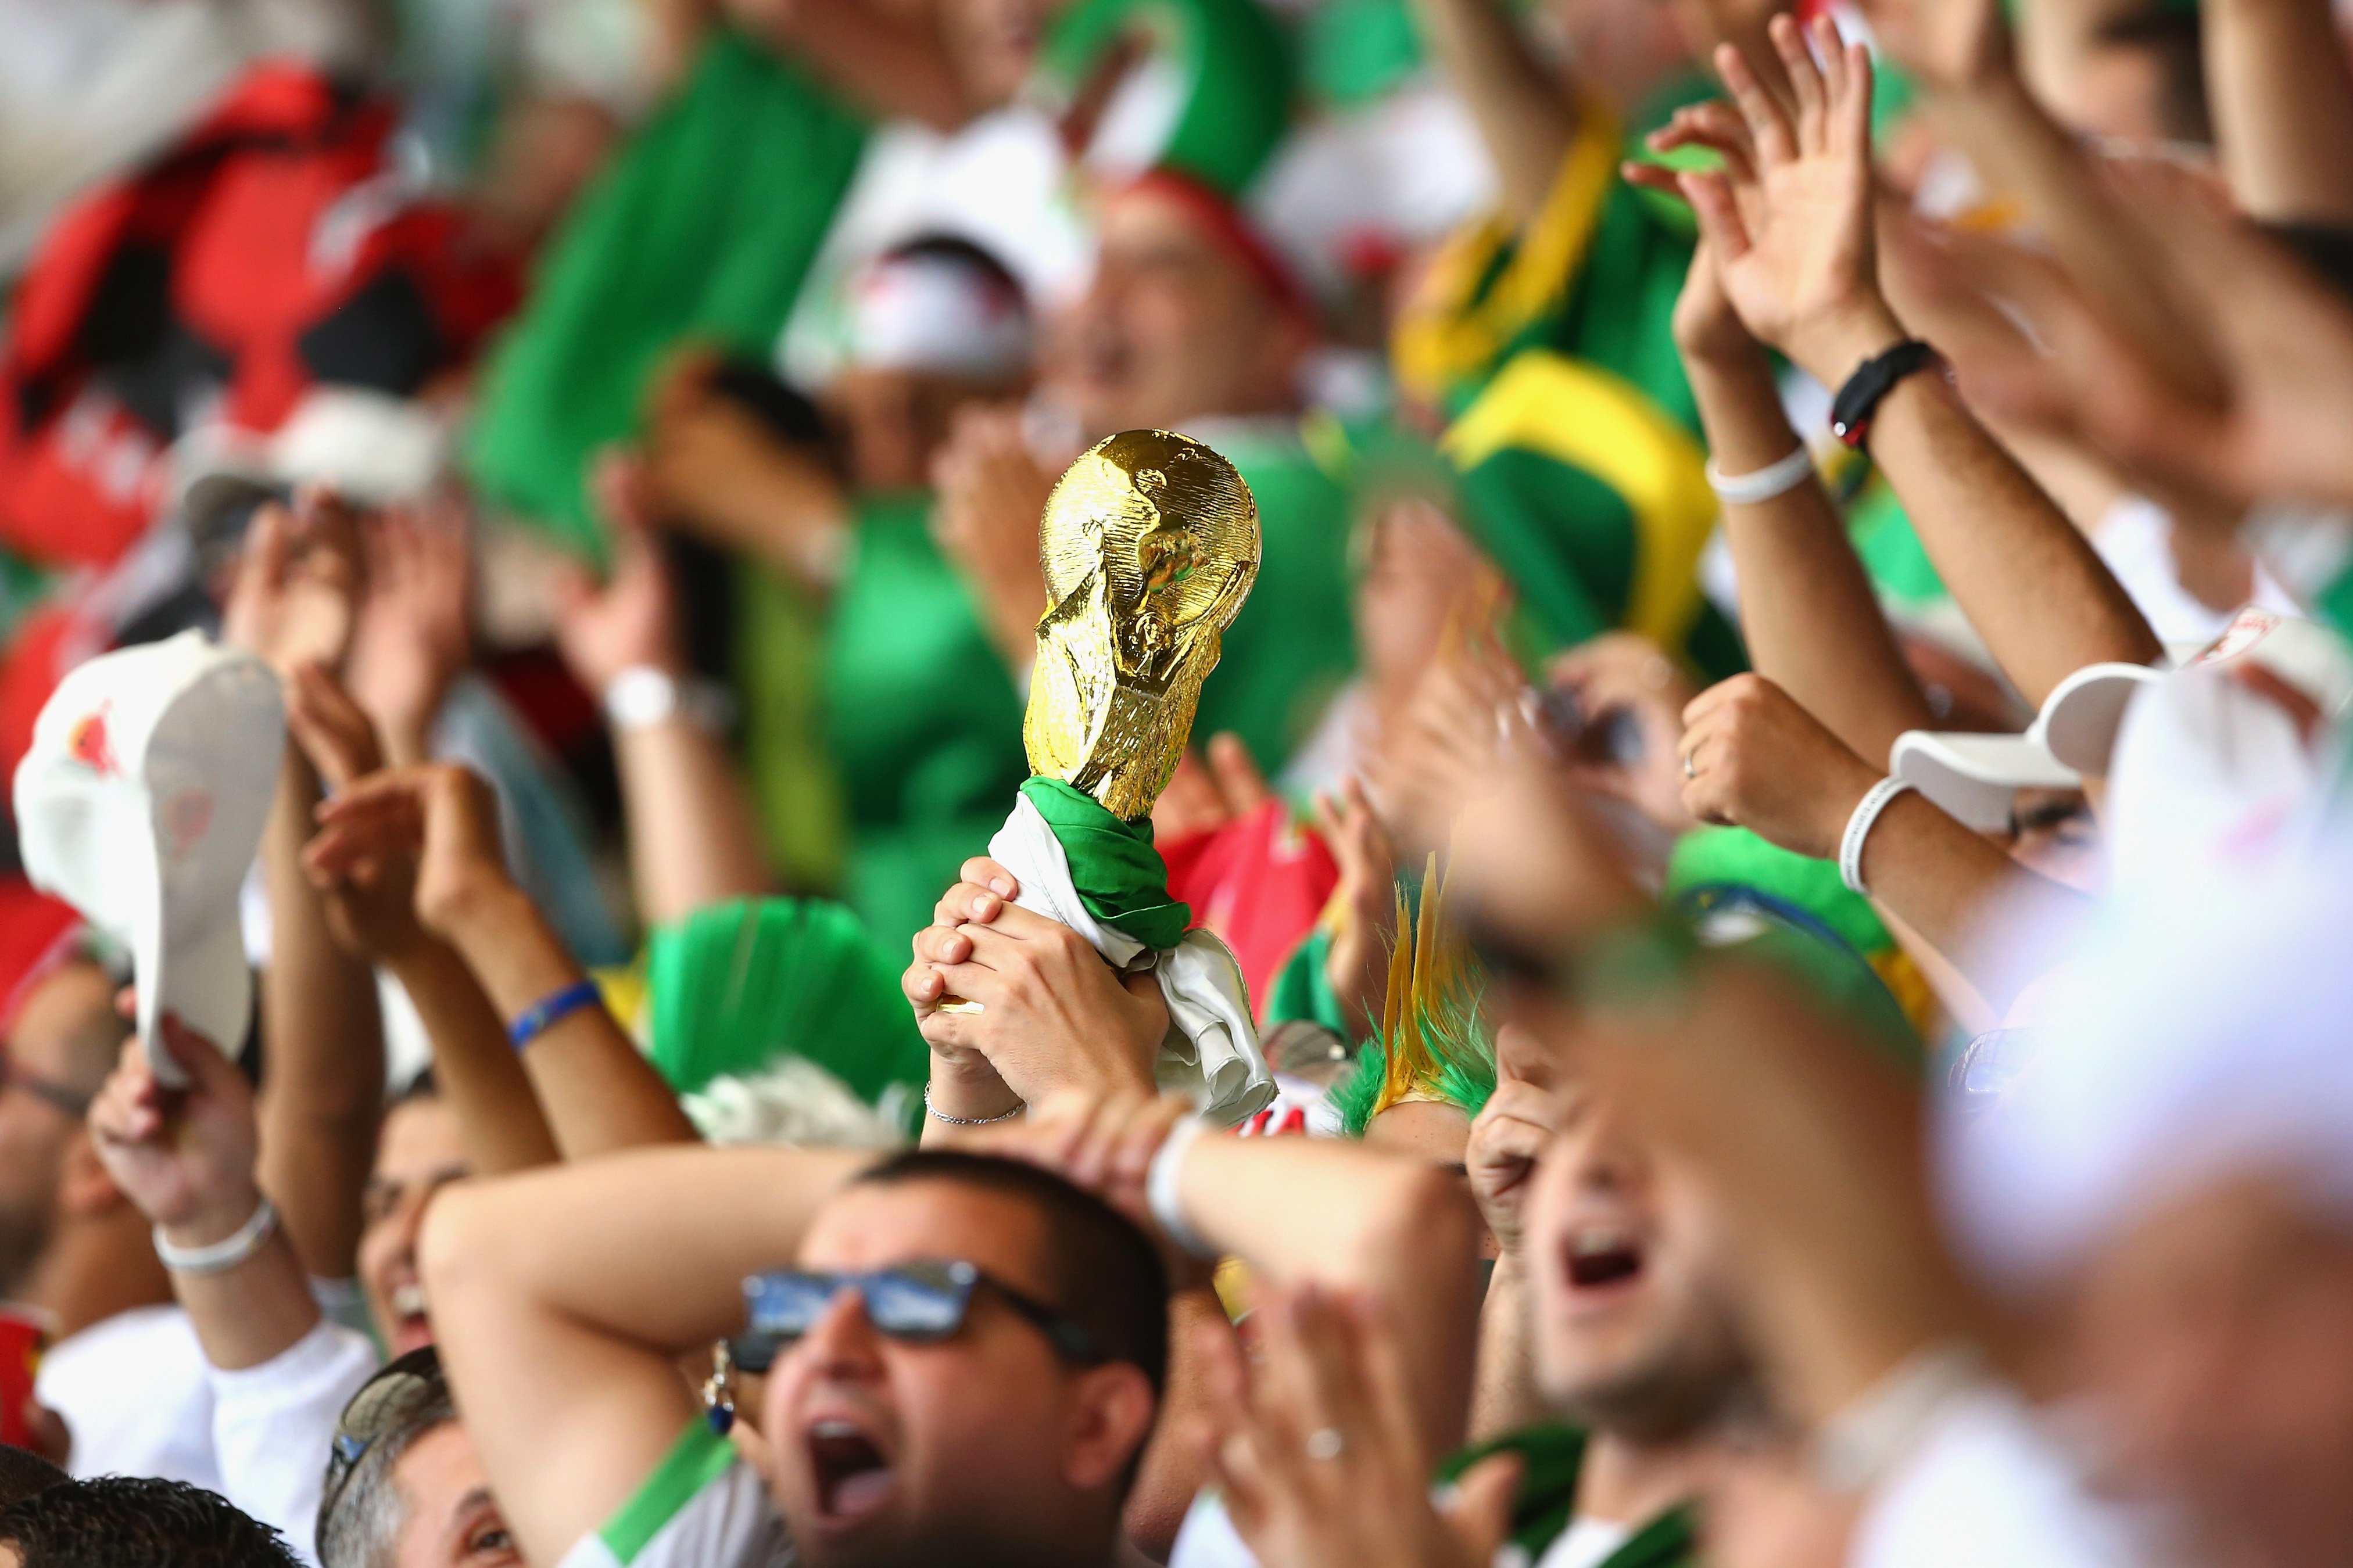 A fan holds up a replica of the World Cup trophy prior to the 2014 FIFA World Cup Brazil Group H match between Belgium and Algeria at Estadio Mineirao on June 17, 2014 in Belo Horizonte, Brazil.